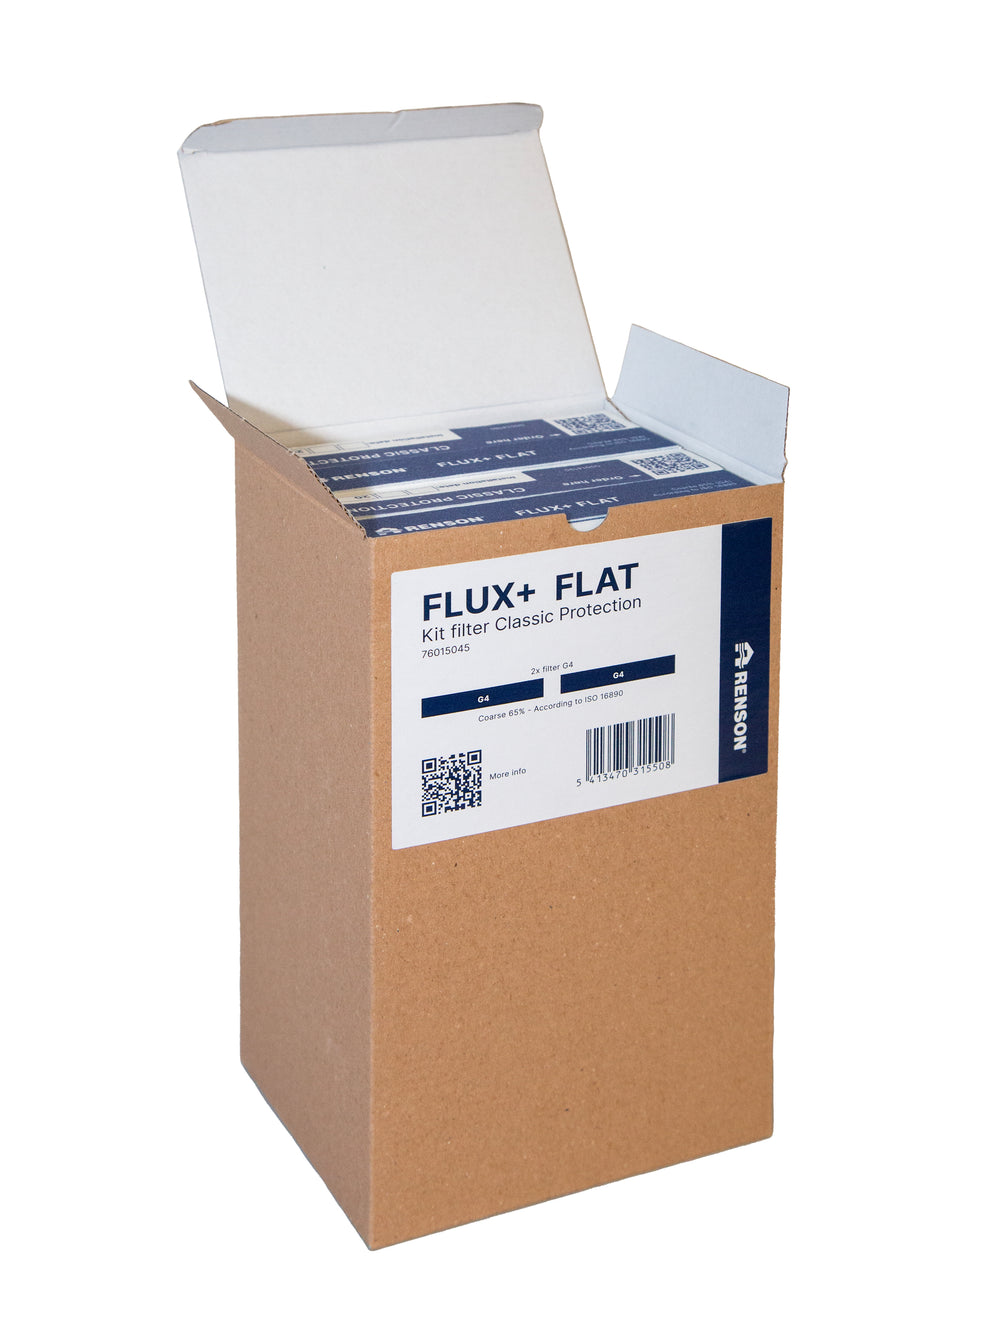 KIT FLUX+ FLAT : classic protection filter 